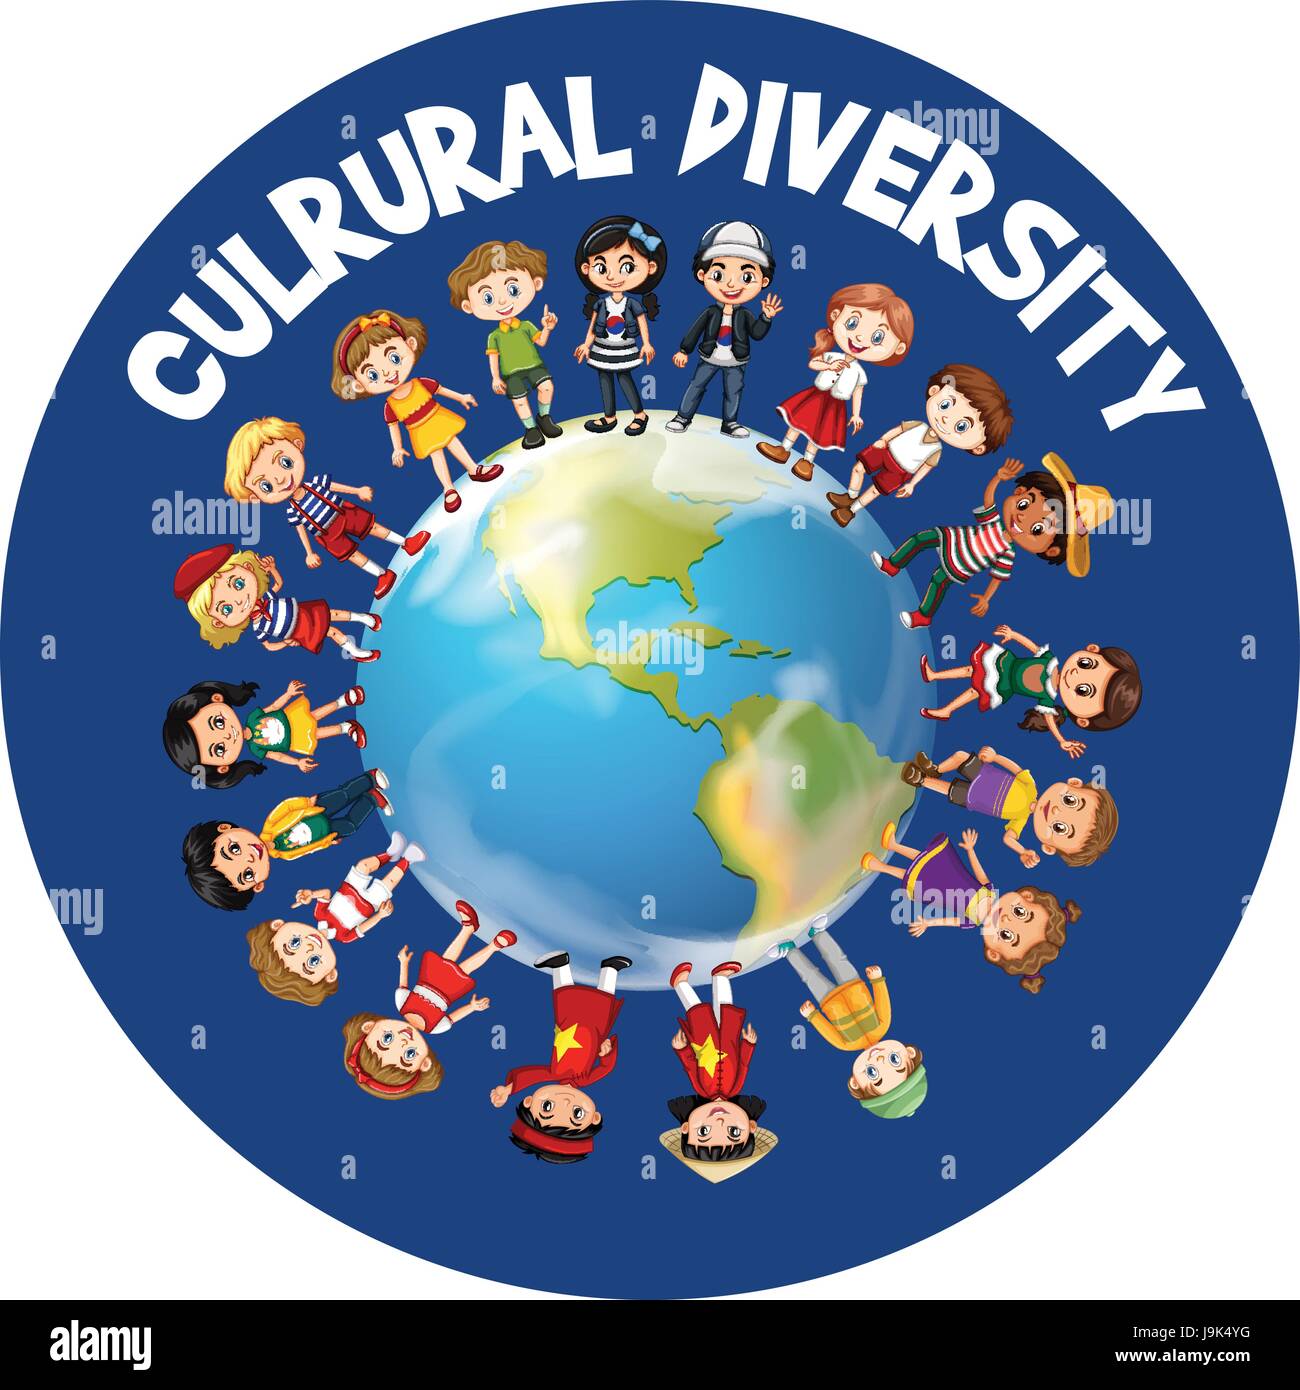 Cultural diversity background Stock Vector Images   Alamy